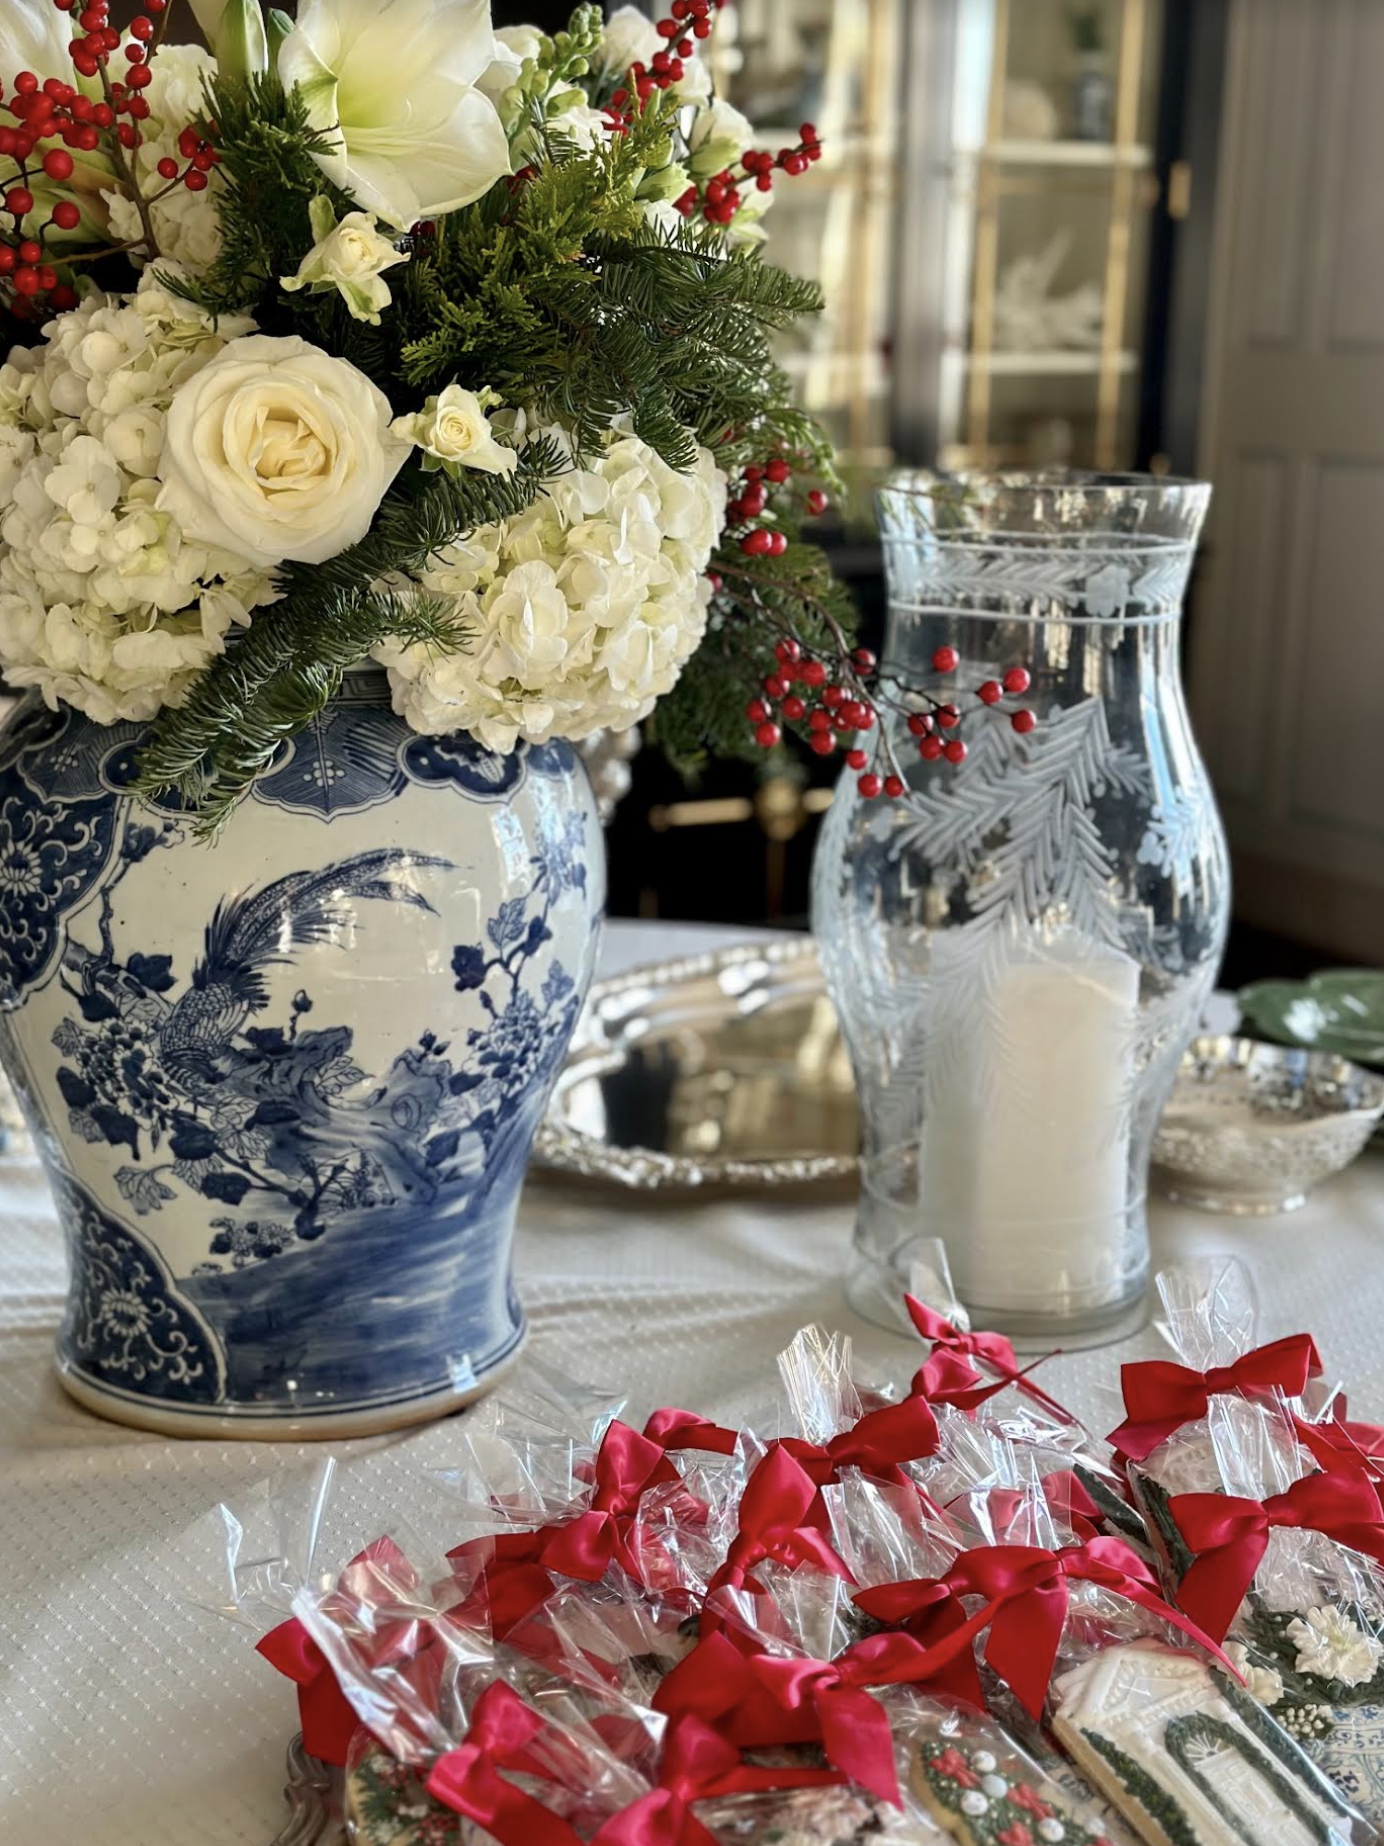 A recap on our Holiday cocktail party….